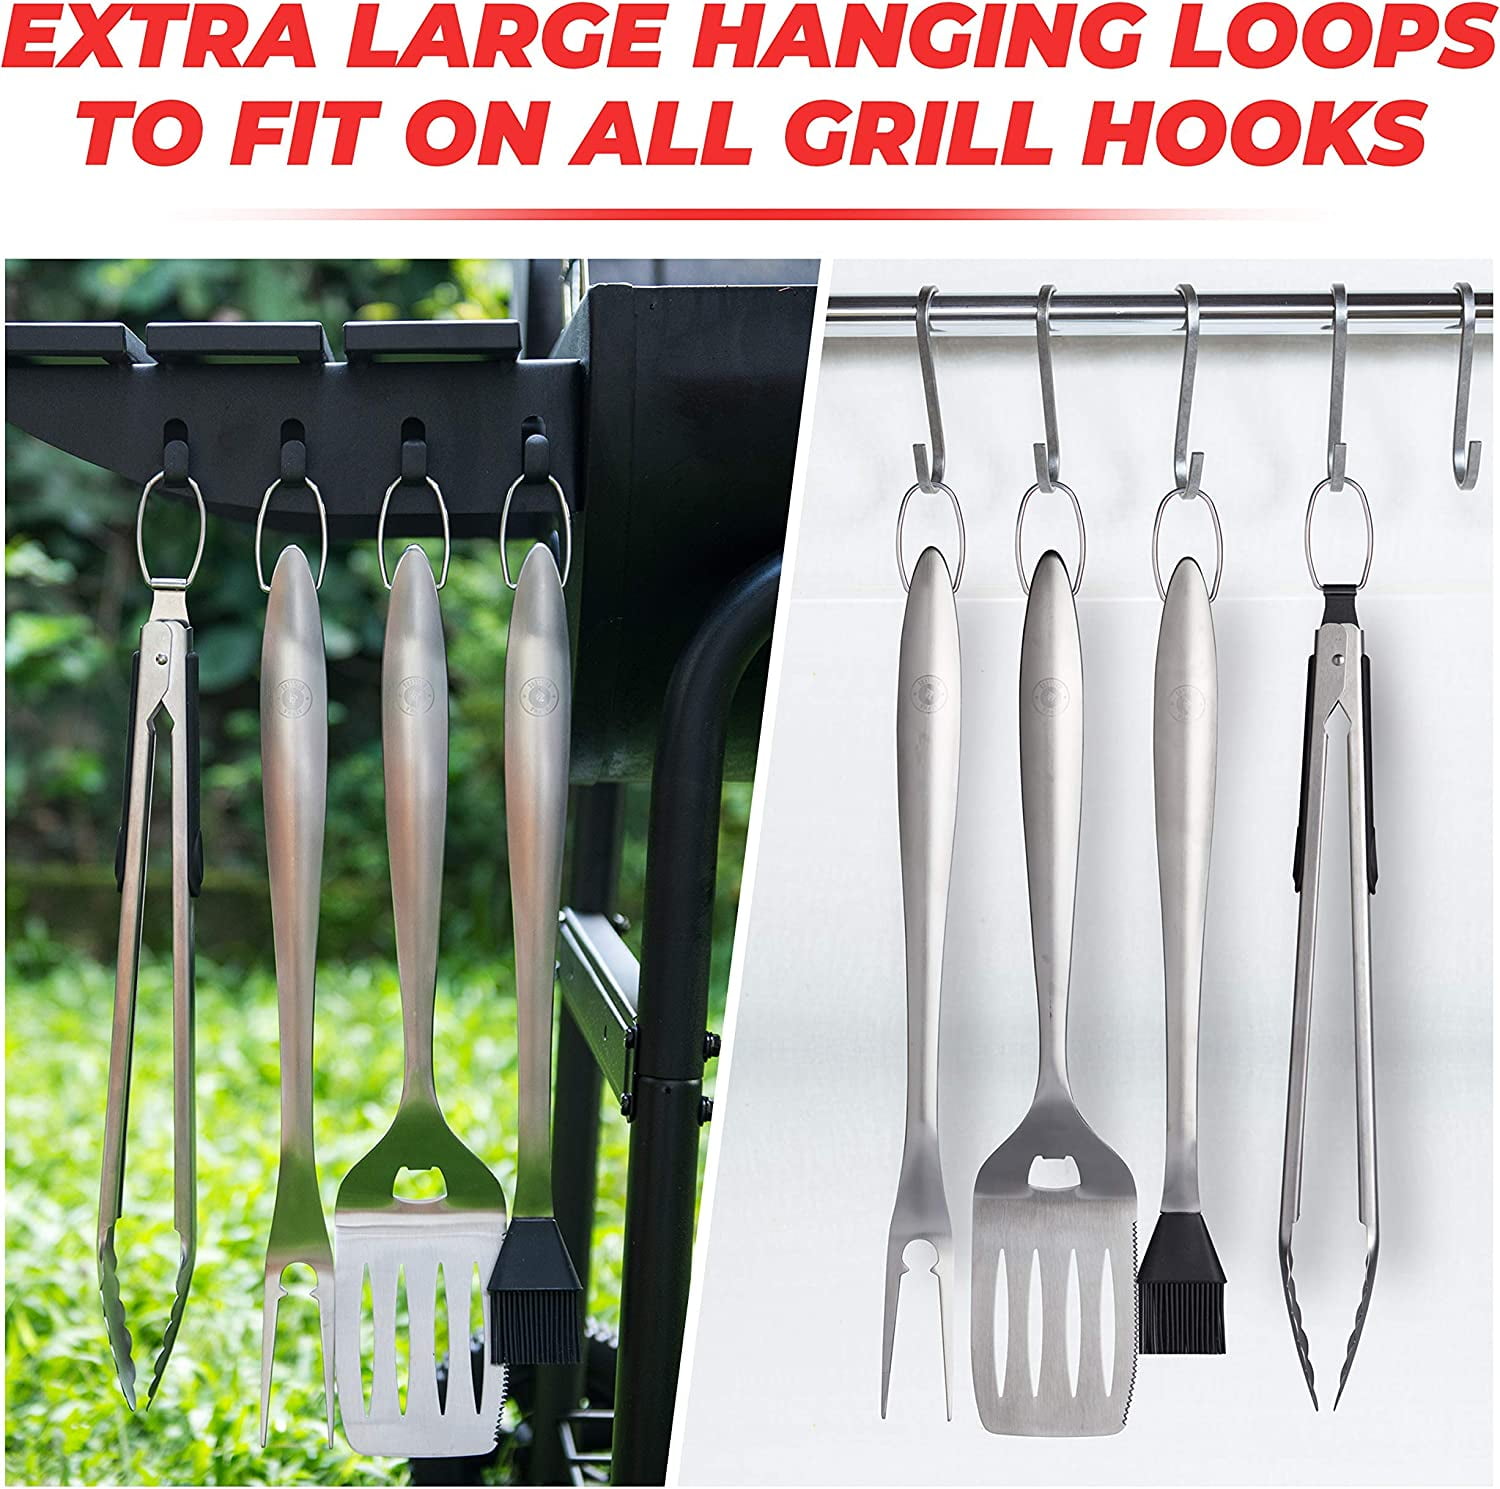 ROMANTICIST 27pcs Heavy Duty BBQ Tools Gift Set for Men Dad, Extra Thick  Stainless Steel Grill Utensils with Meat Claws, Grilling Accessories Kit in